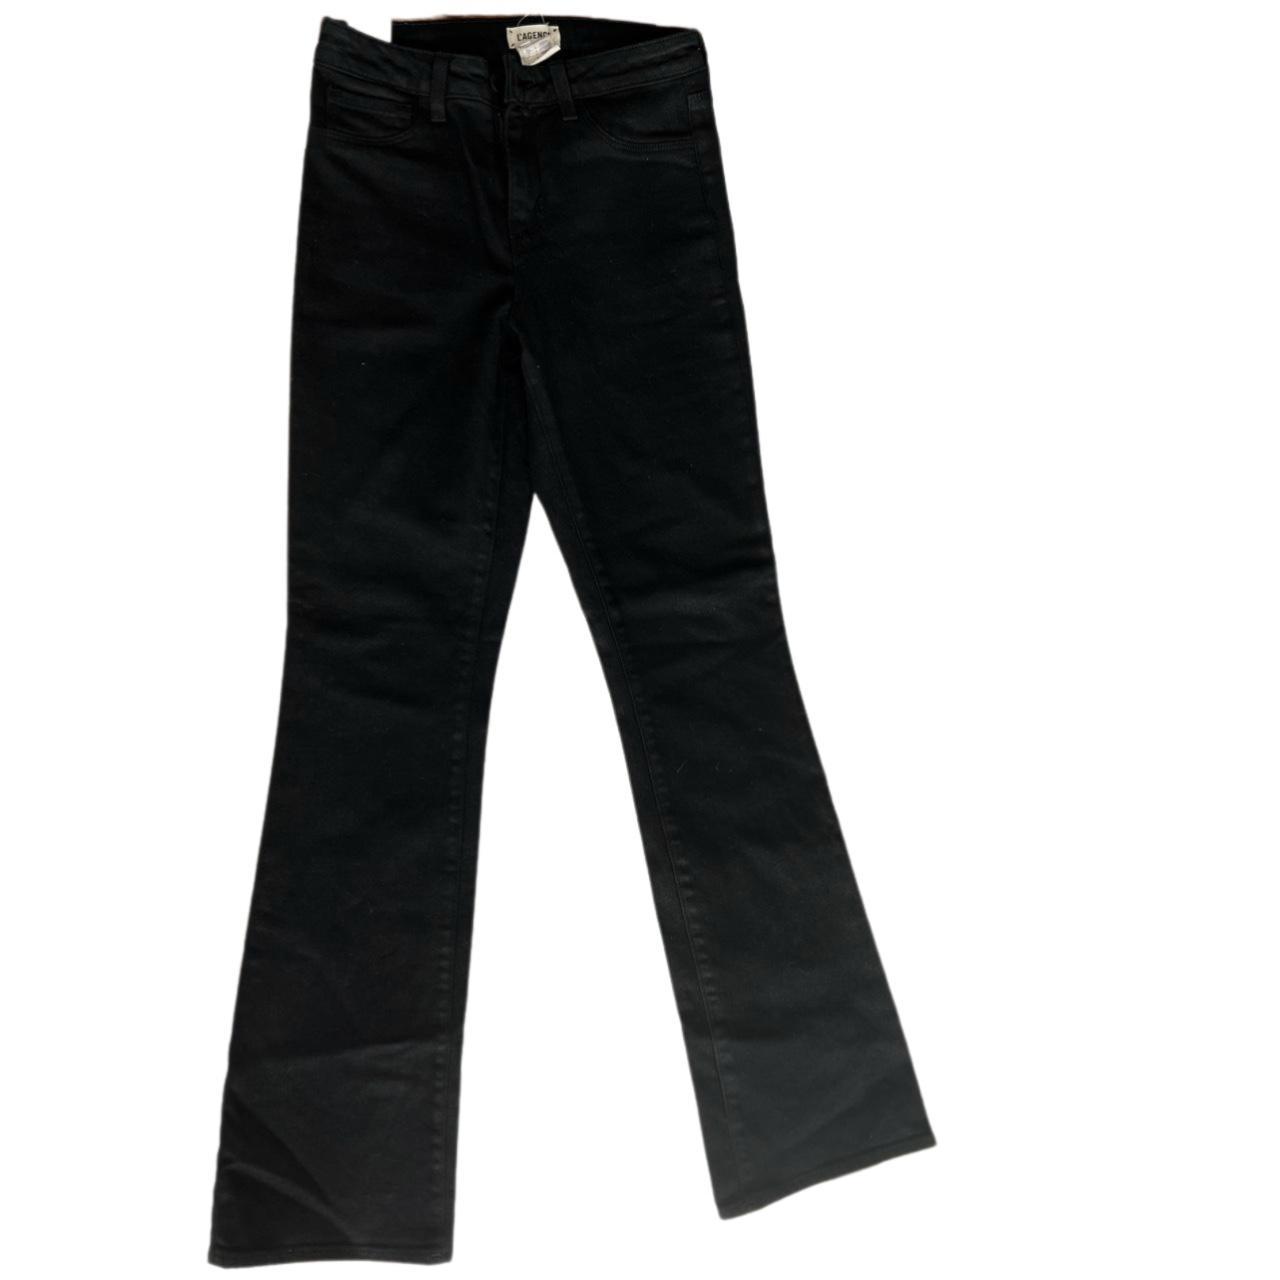 Product Image 1 - L’AGENCE black flare pants
Size: 26”
Price: